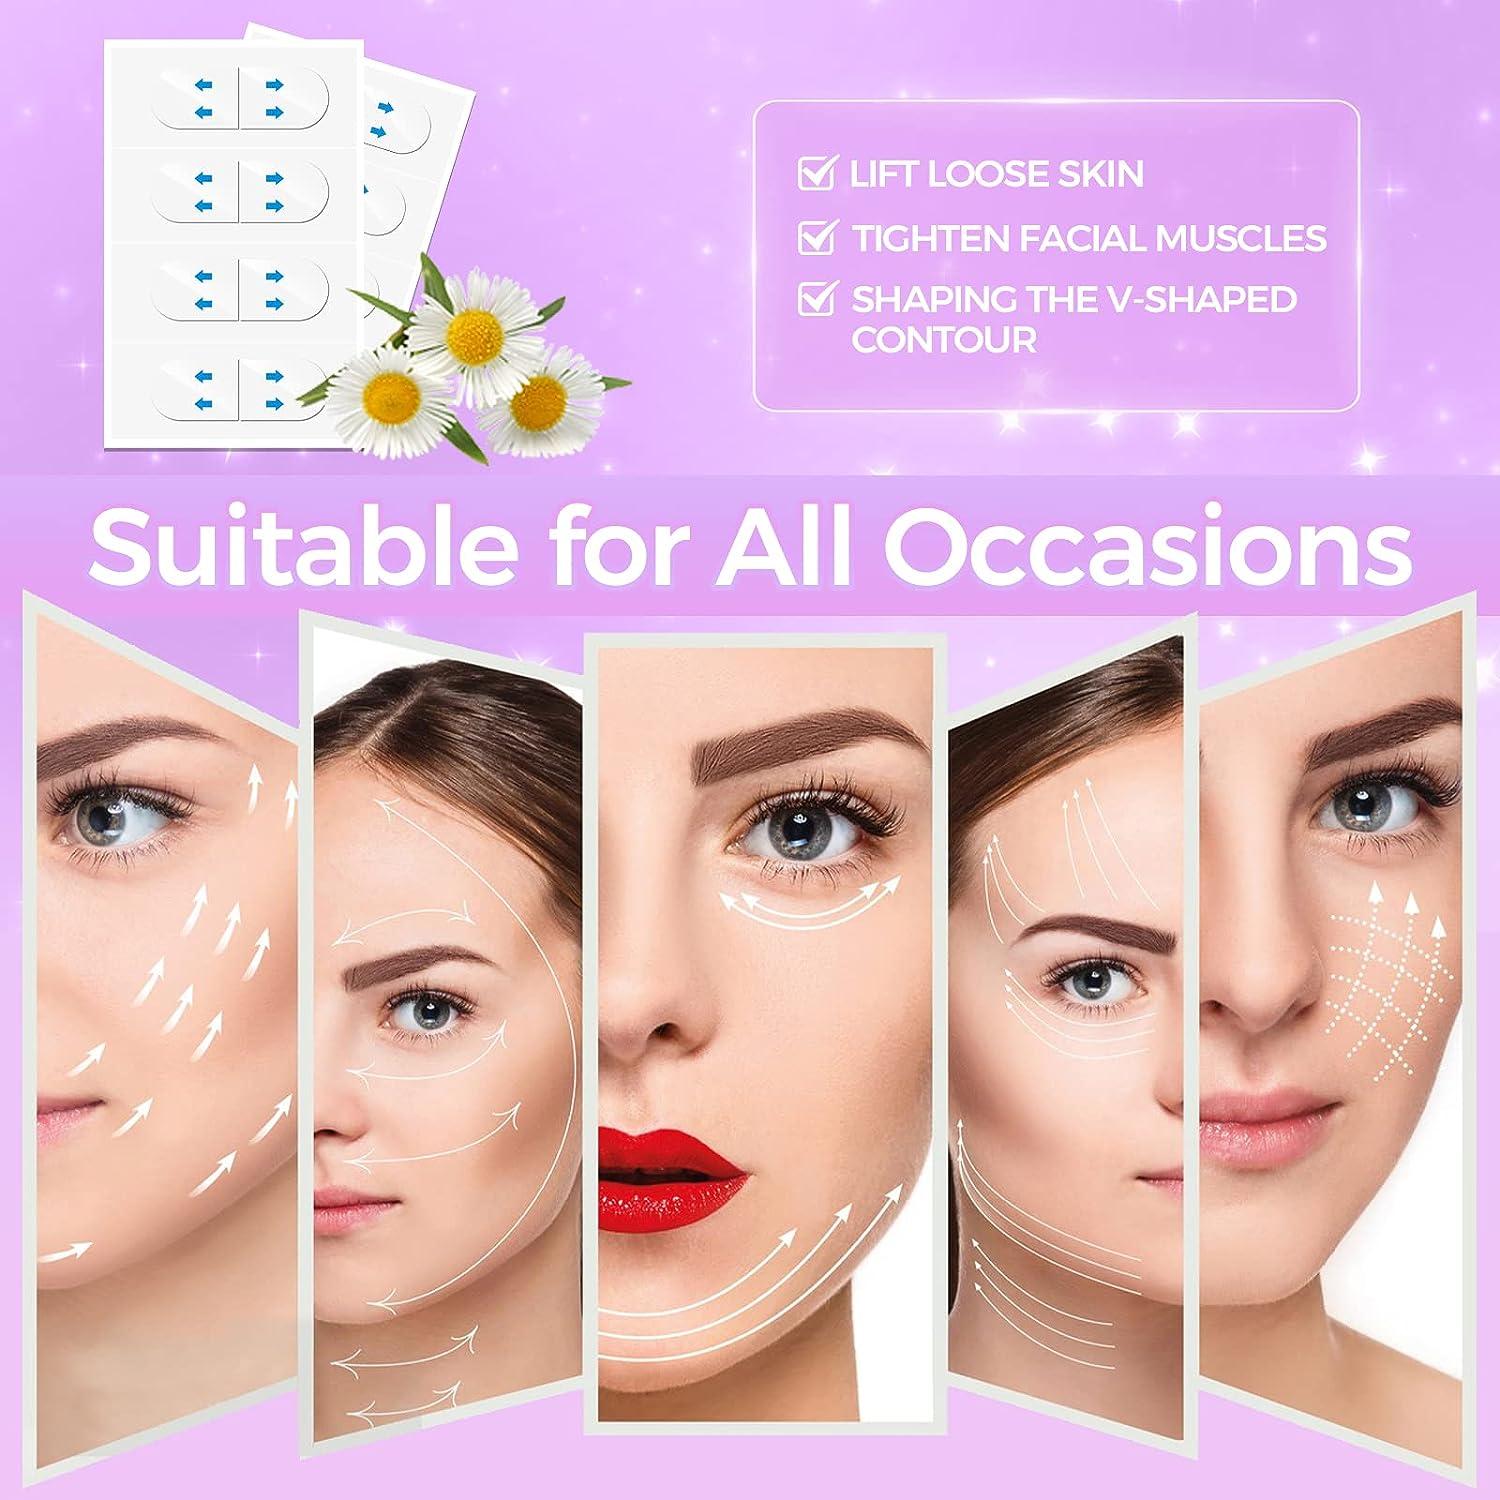 Instant Face Lift Tape - Does it work? 